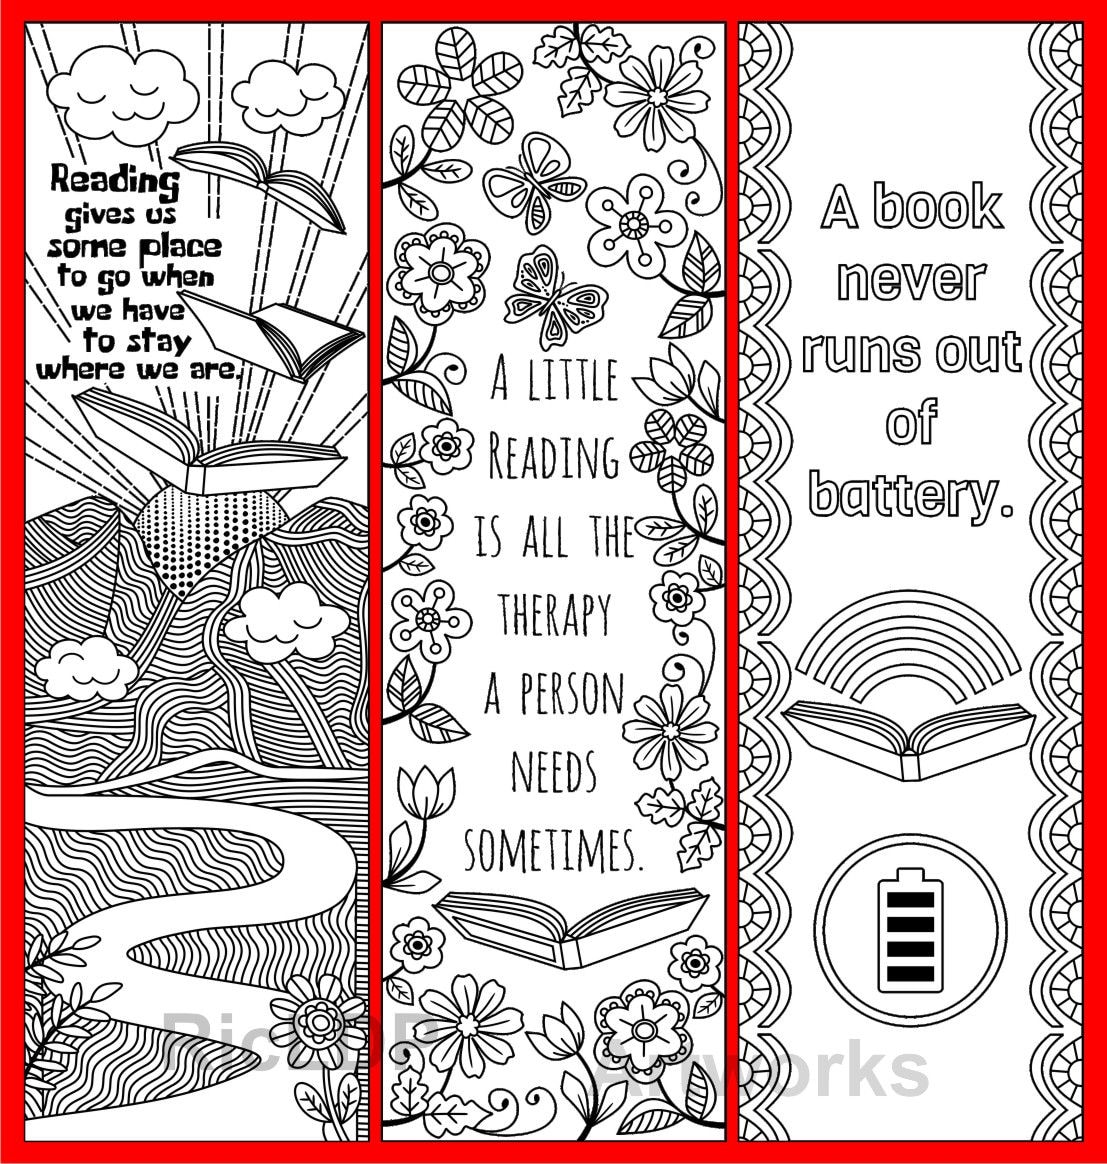 8 Coloring Bookmarks About Reading Cute Markers With Images 